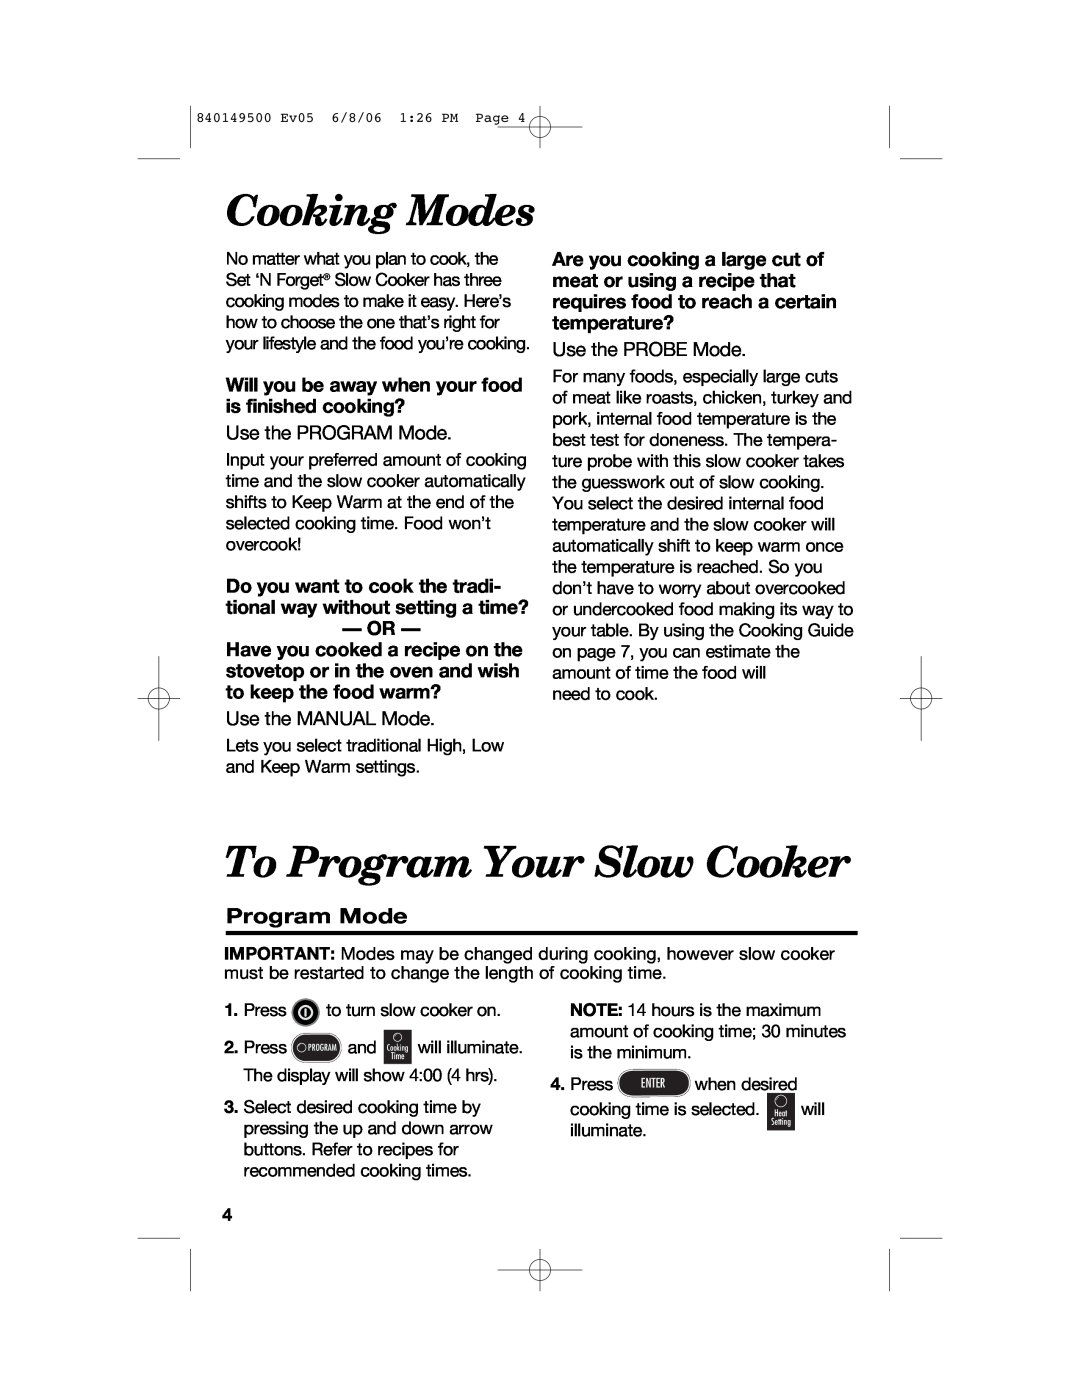 Proctor-Silex 840149500 manual Cooking Modes, To Program Your Slow Cooker, Program Mode, Select desired cooking time by 